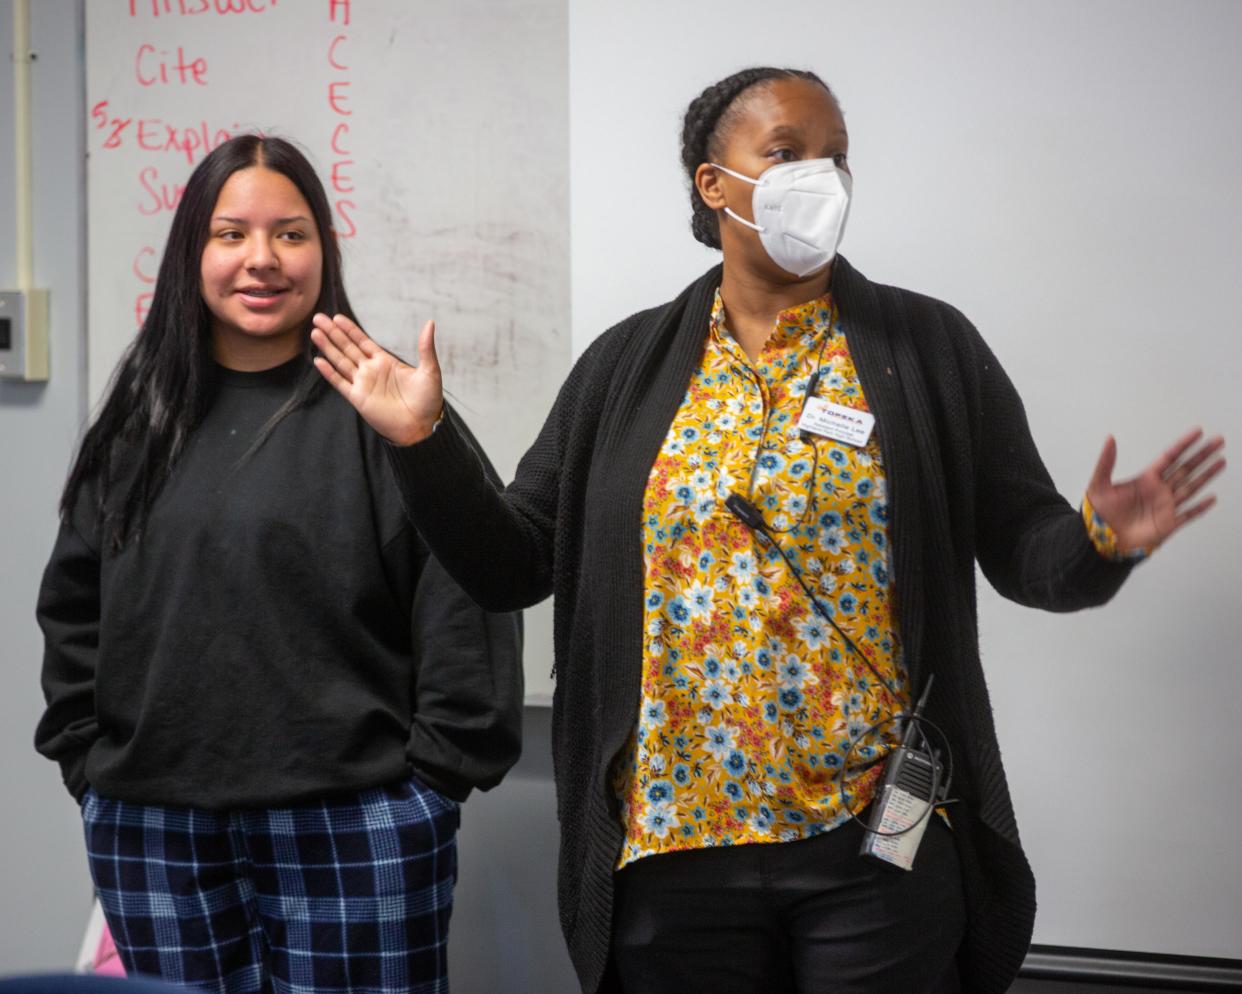 Highland Park High School assistant principal Michelle Lee shares what she learned about her partner Evelyn Aguilera, senior, during a Girl Up club warmup activity Thursday morning.